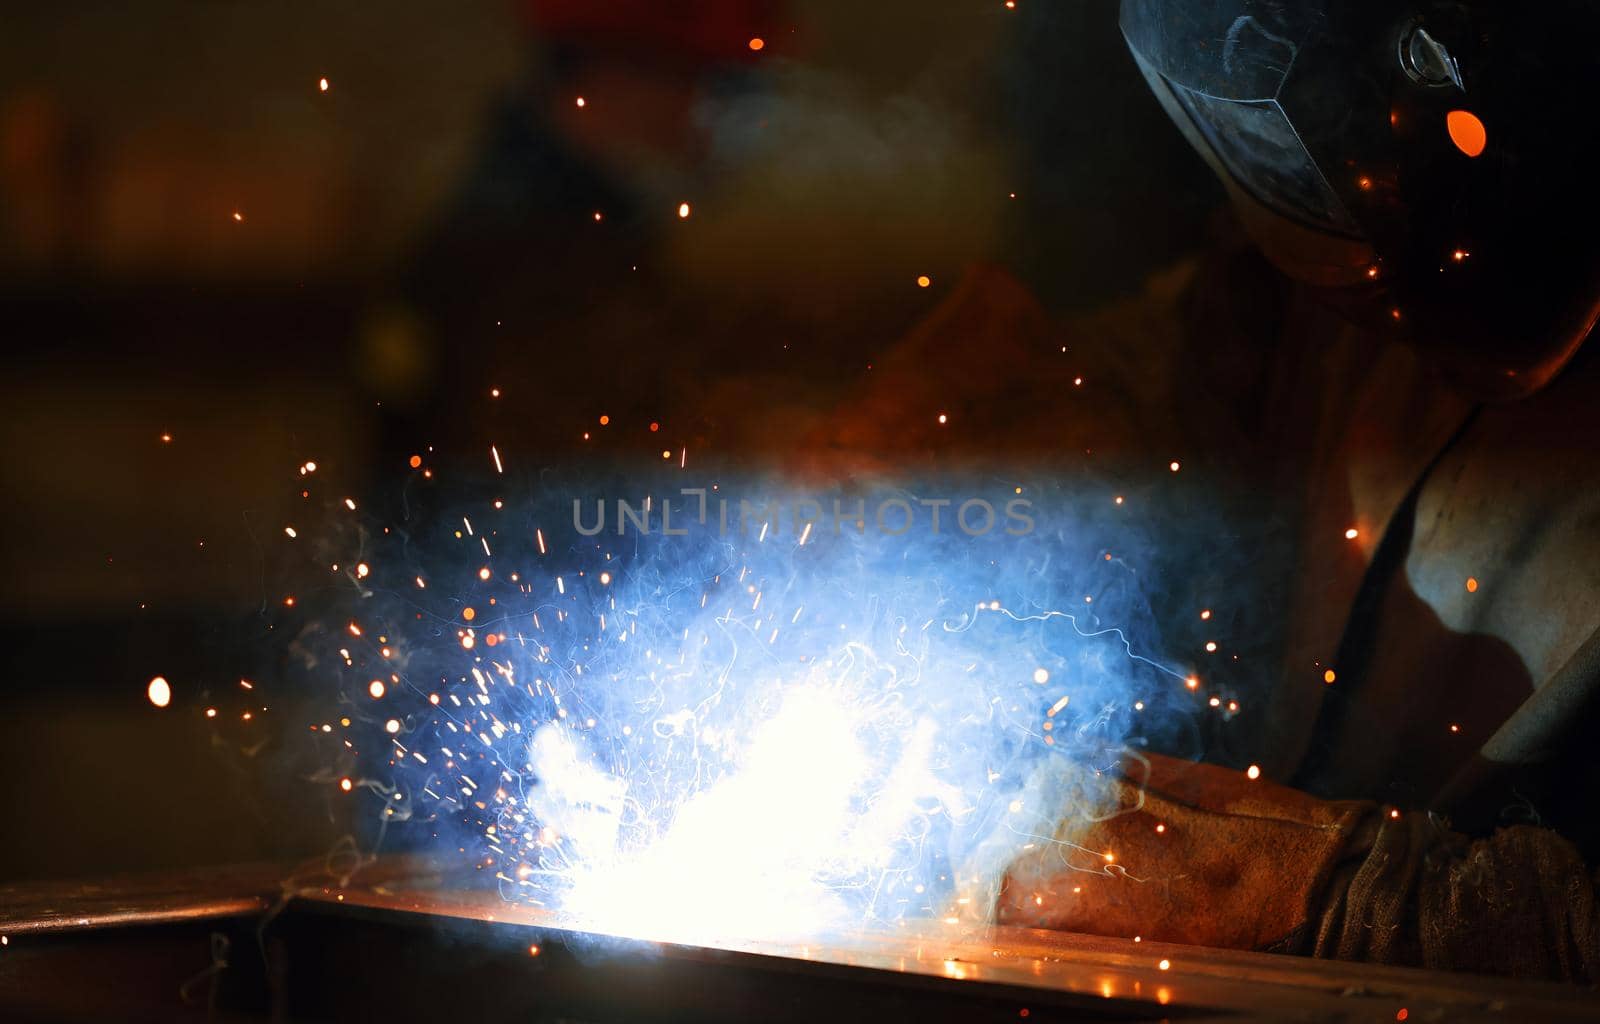 Welder at work. Welding of metal sparks and smoke in the workshop. Industrial Welder With gas Torch in Protective Helmet, welding metal profiles. The welding operation at construction site.